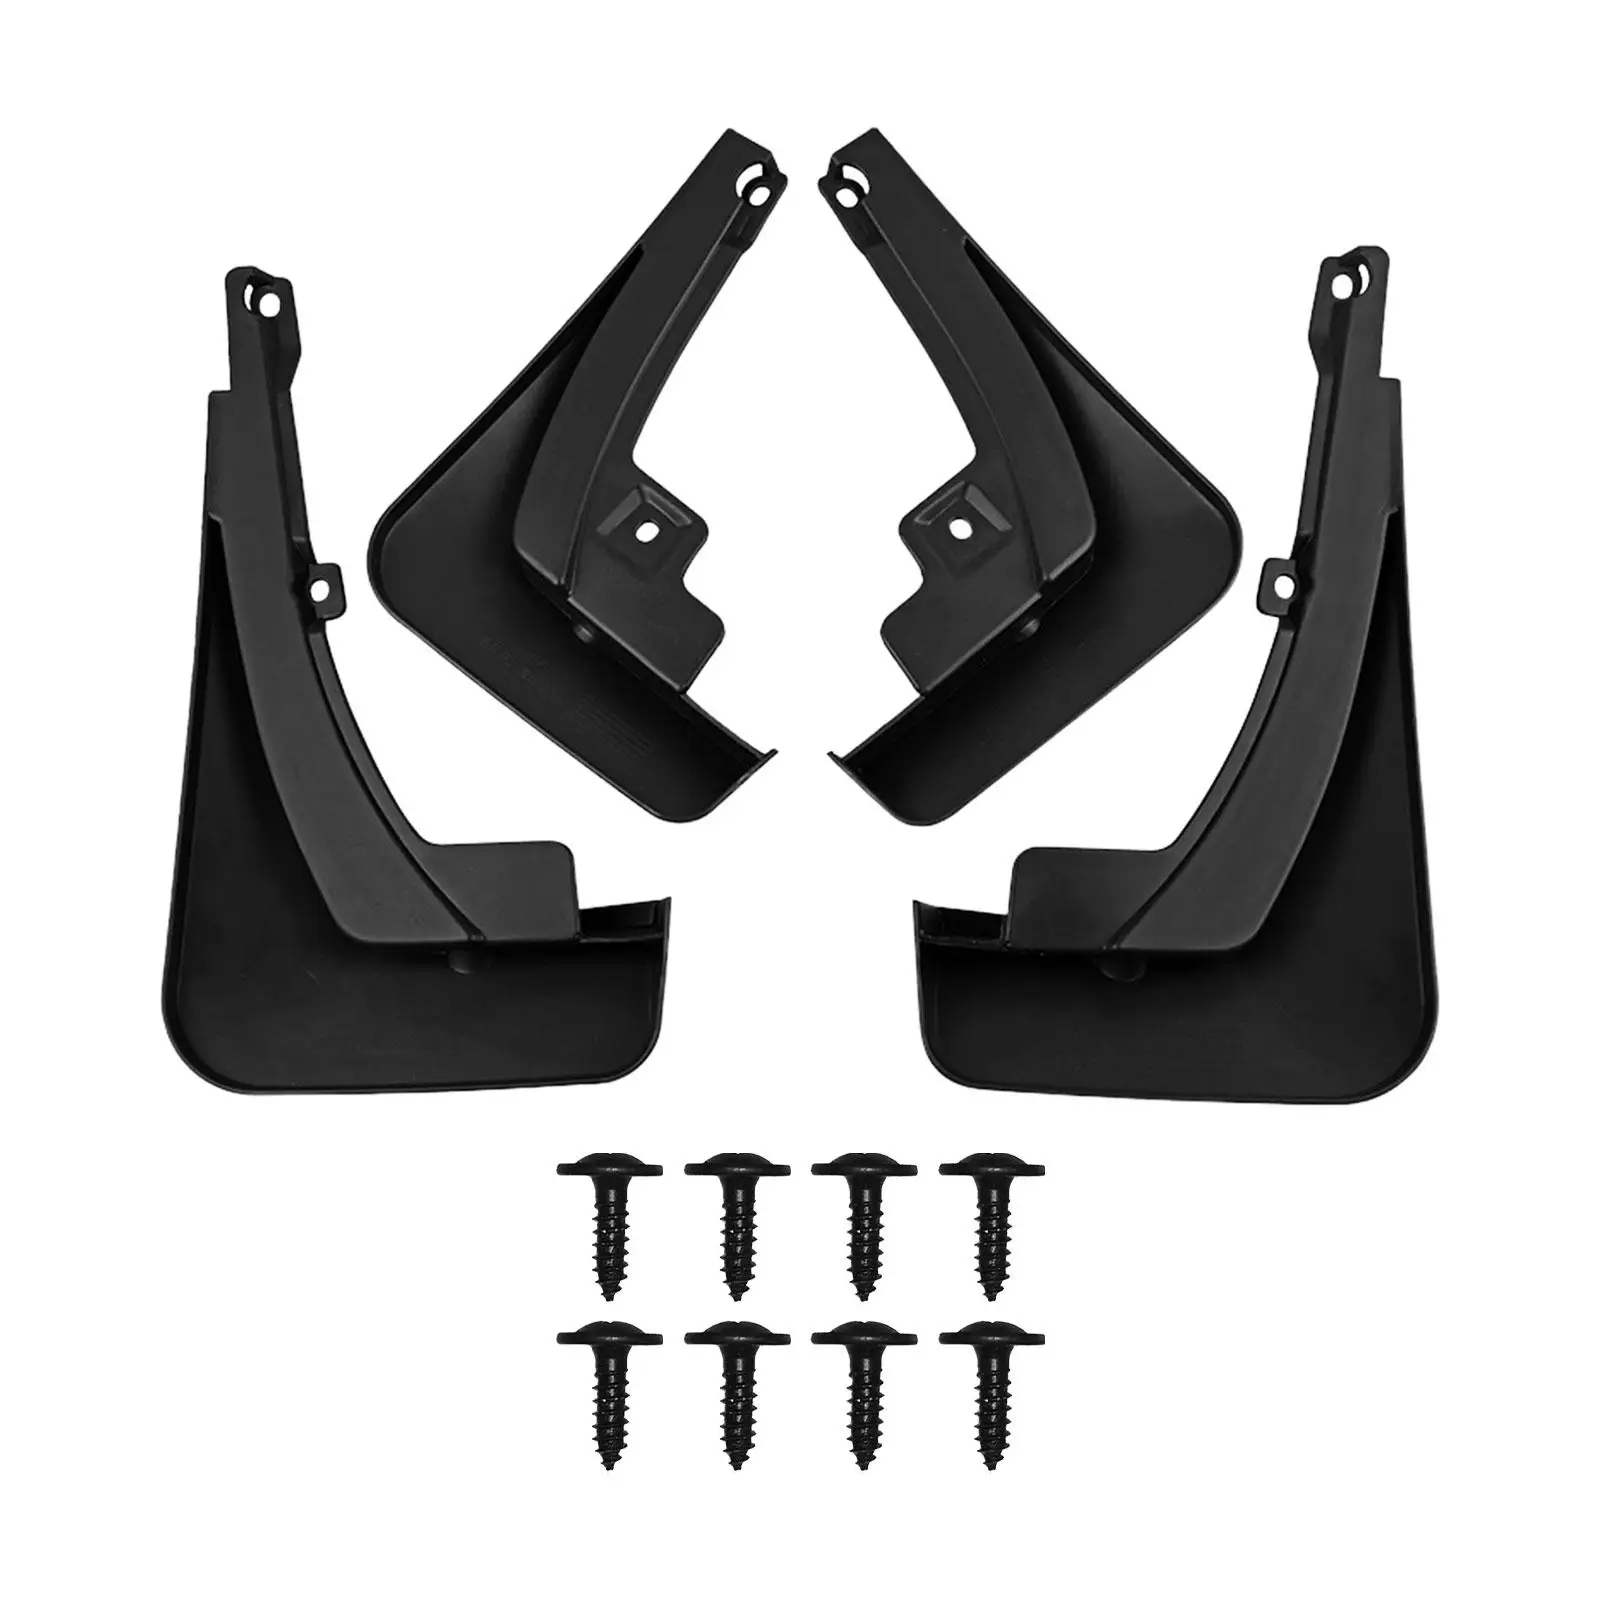 4 Pieces Car Mud Flaps Car Fenders with 8 Screws Mudguard for Geely Monjaro after 2021 Replacement Part Easy Installation